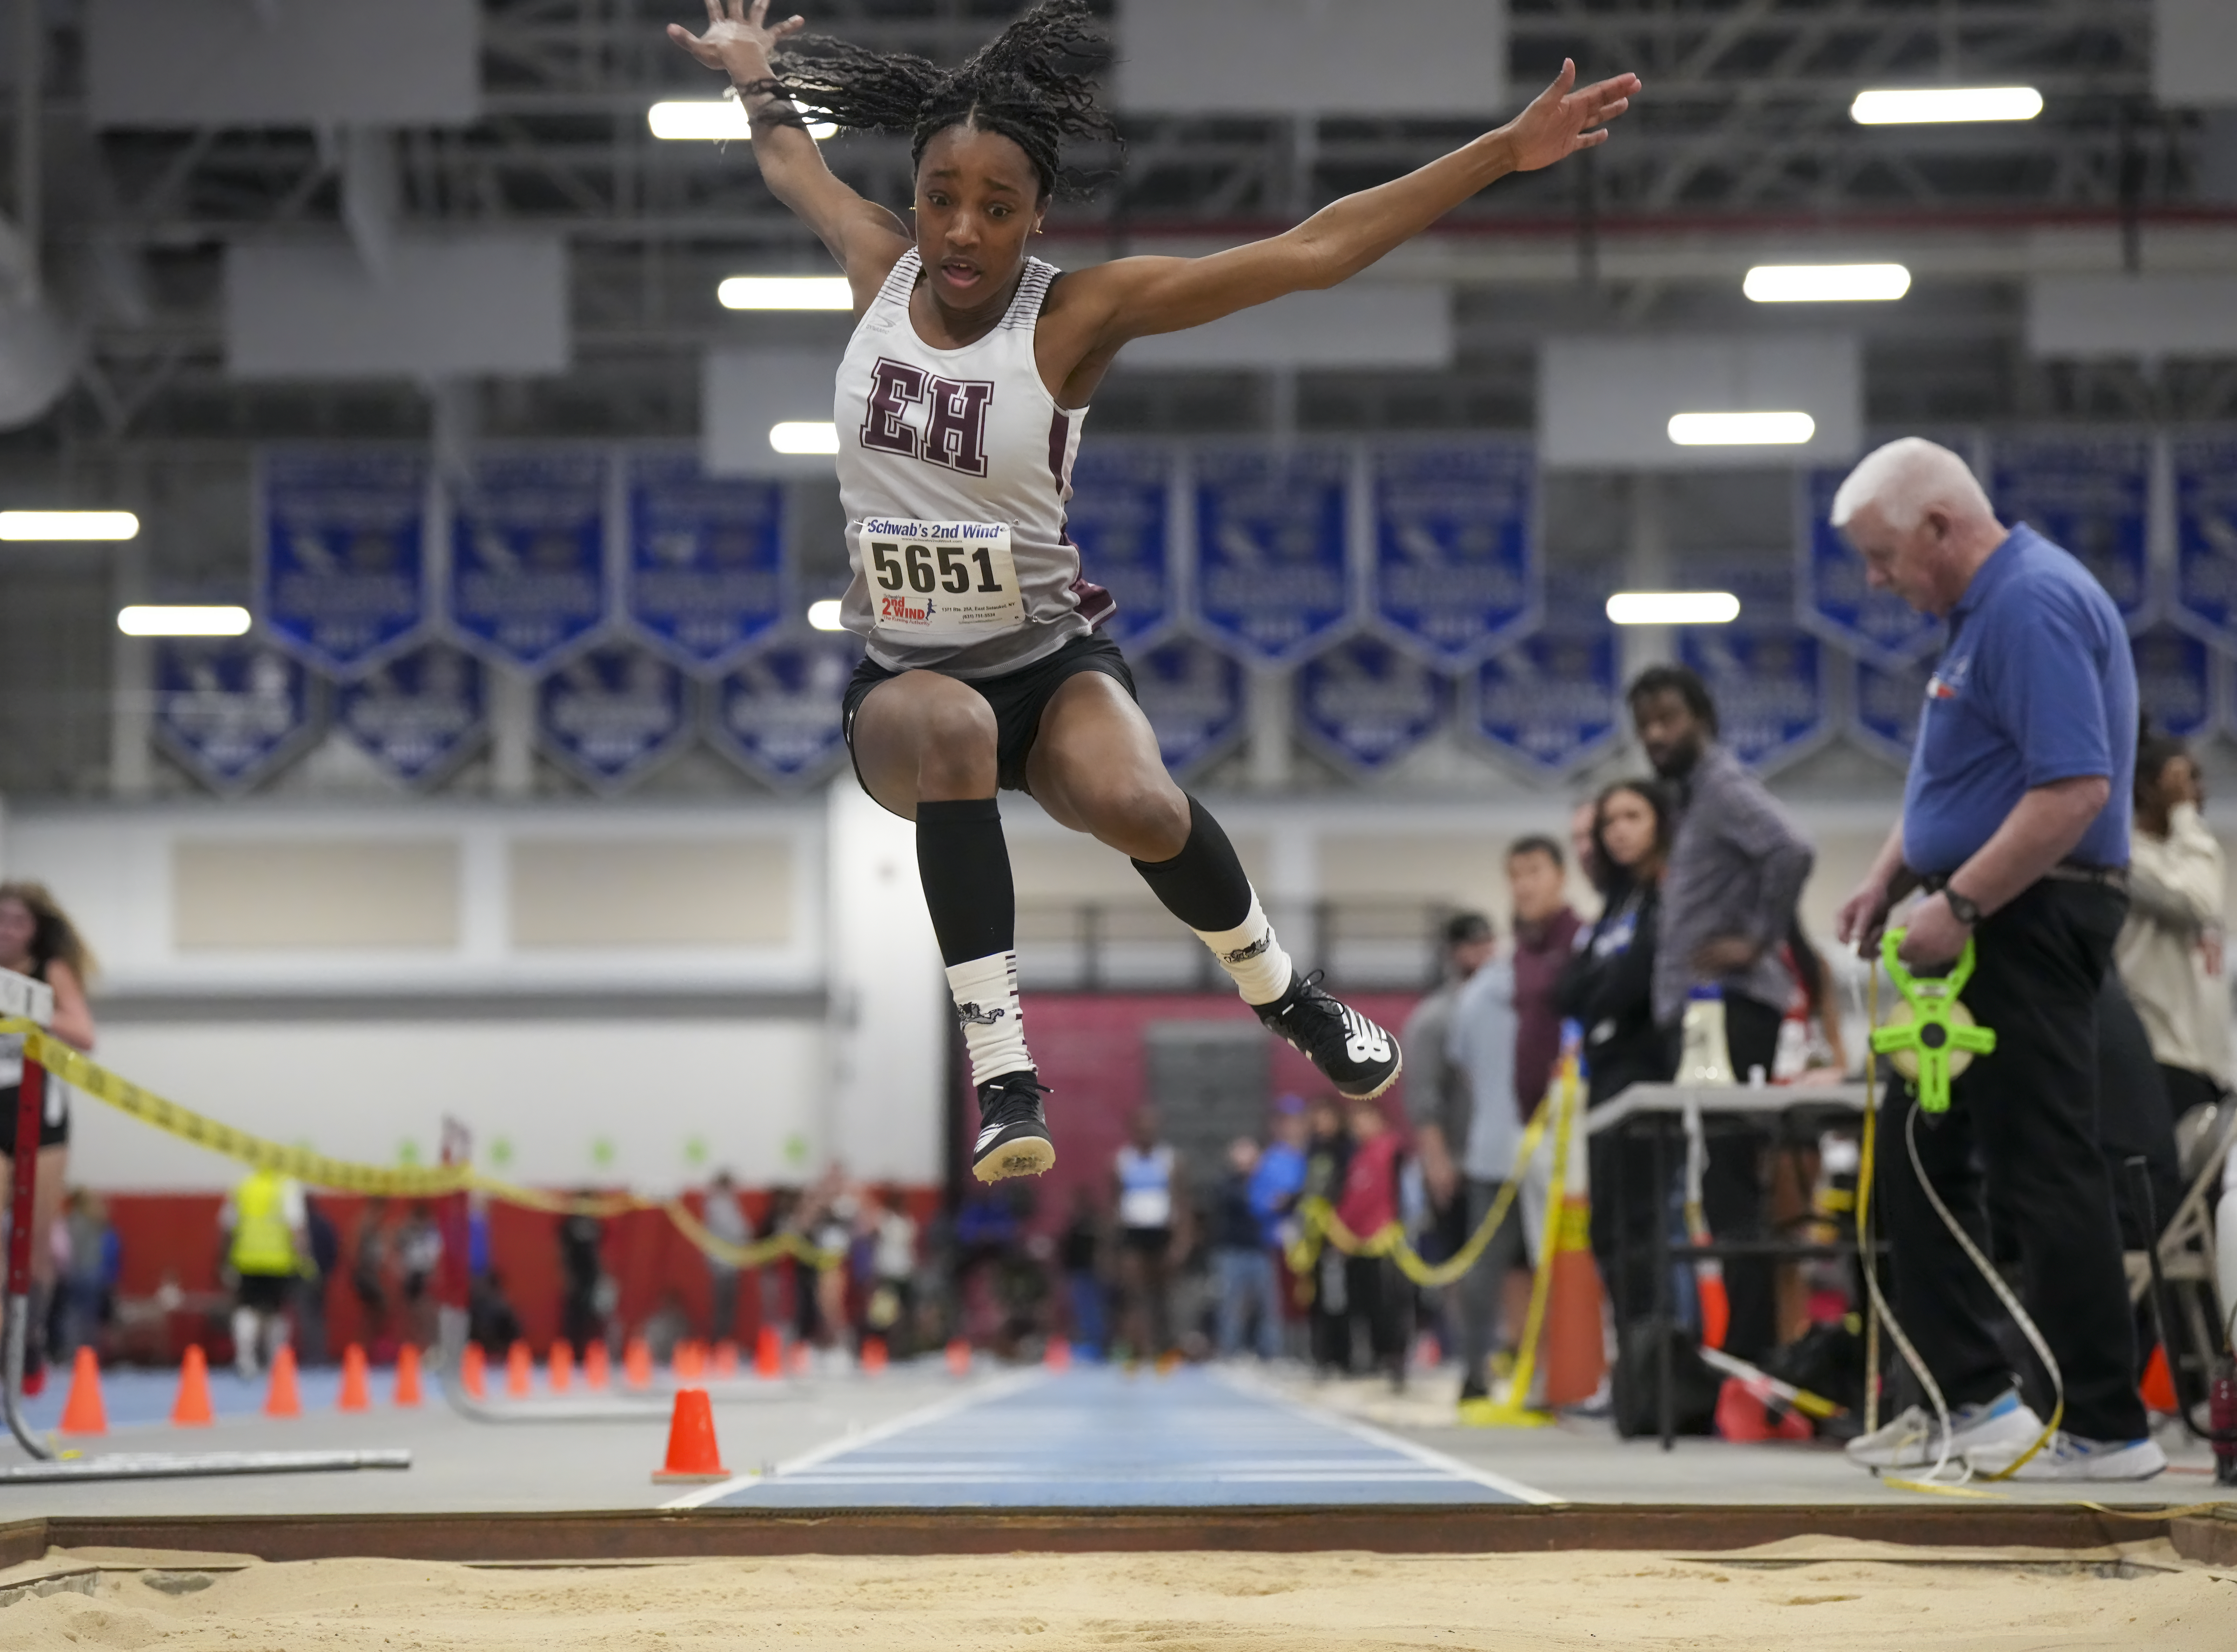 Leslie Samuel was an All-County long jumper this past winter and just missed qualifying for states by a few placements. She plans on qualifying for states this spring.     RON ESPOSITO